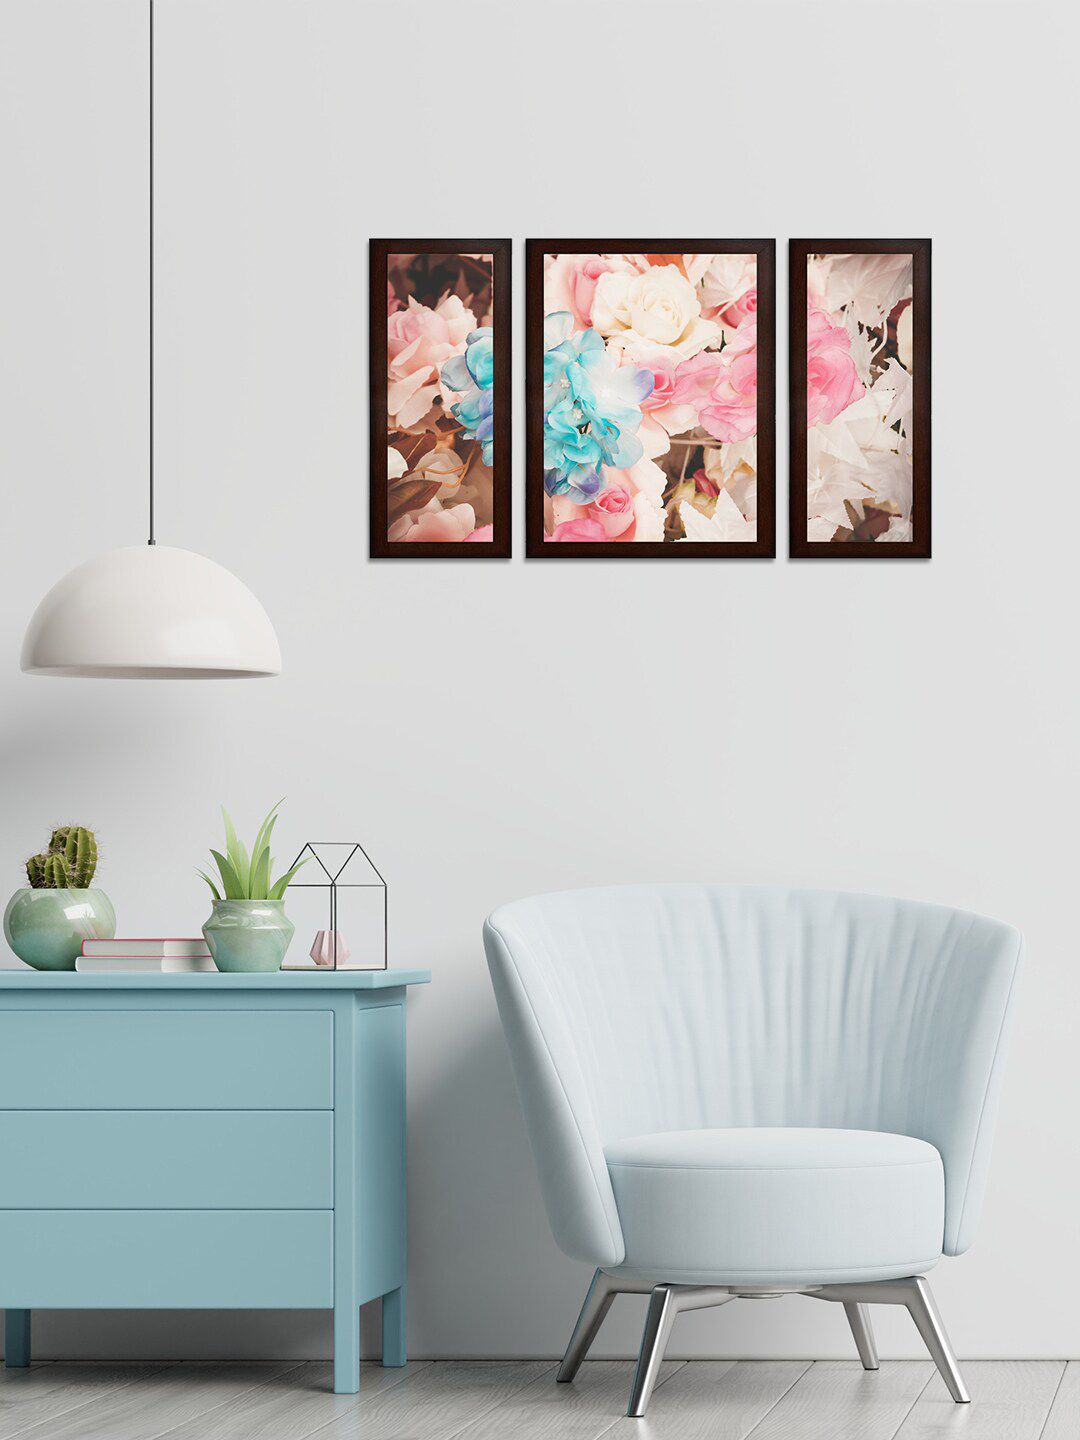 WENS Pink & White Set of 3 Floral Art MDF Wall Paintings Price in India